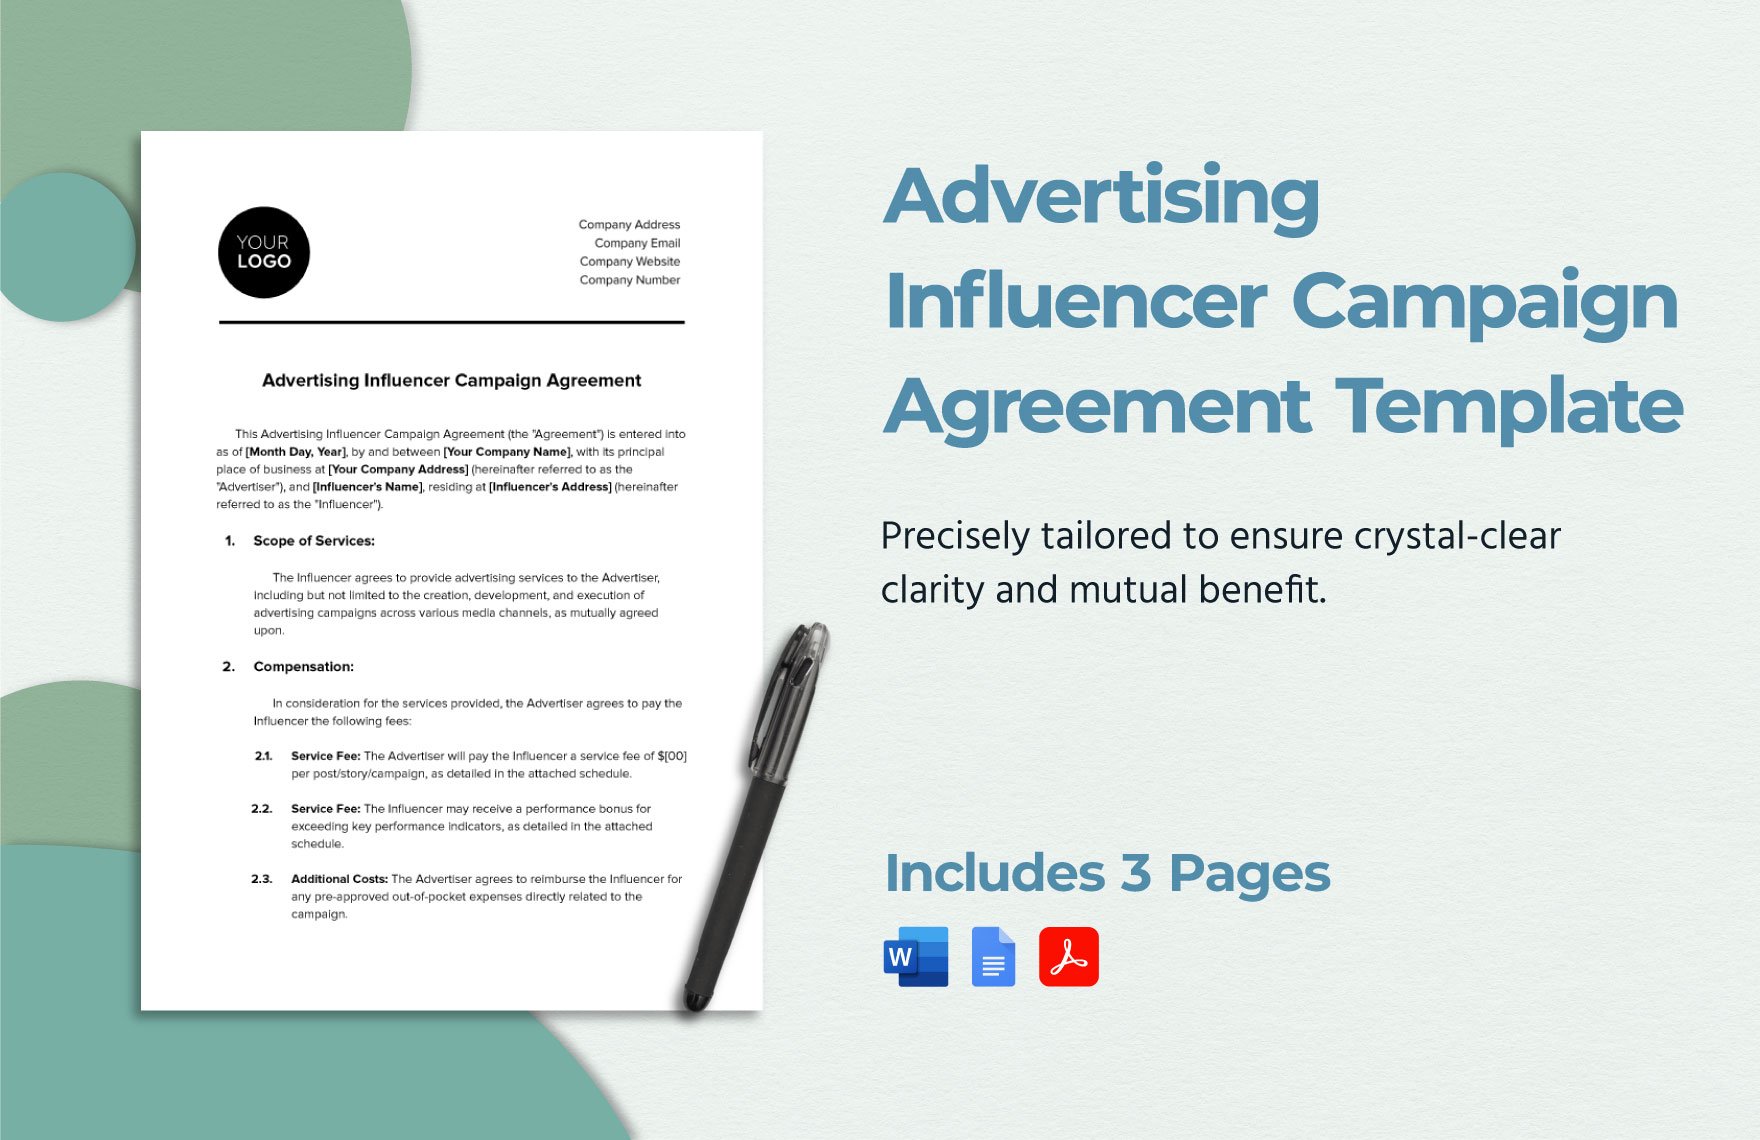 Advertising Influencer Campaign Agreement Template in Word, Google Docs, PDF